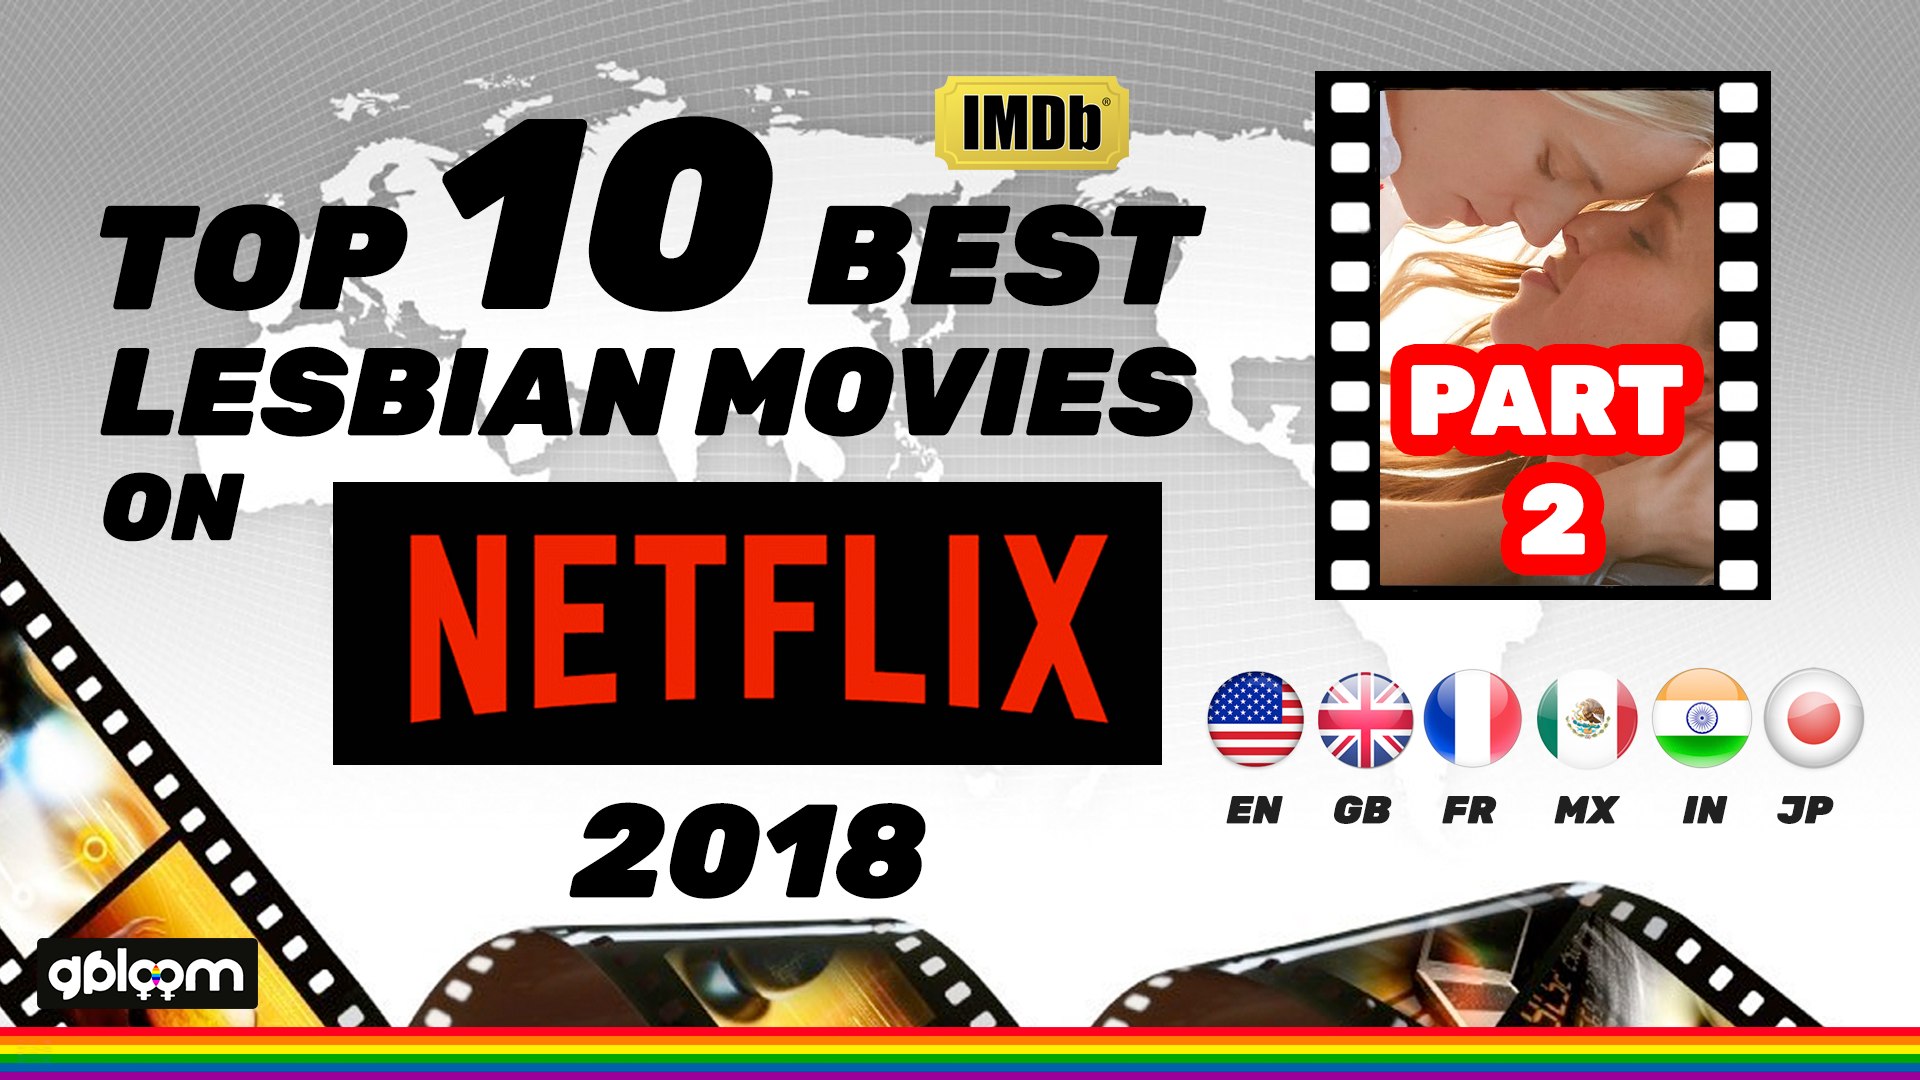 Top 10 best lesbian movies on Nexflix 2018 - PART 2 - video Dailymotion